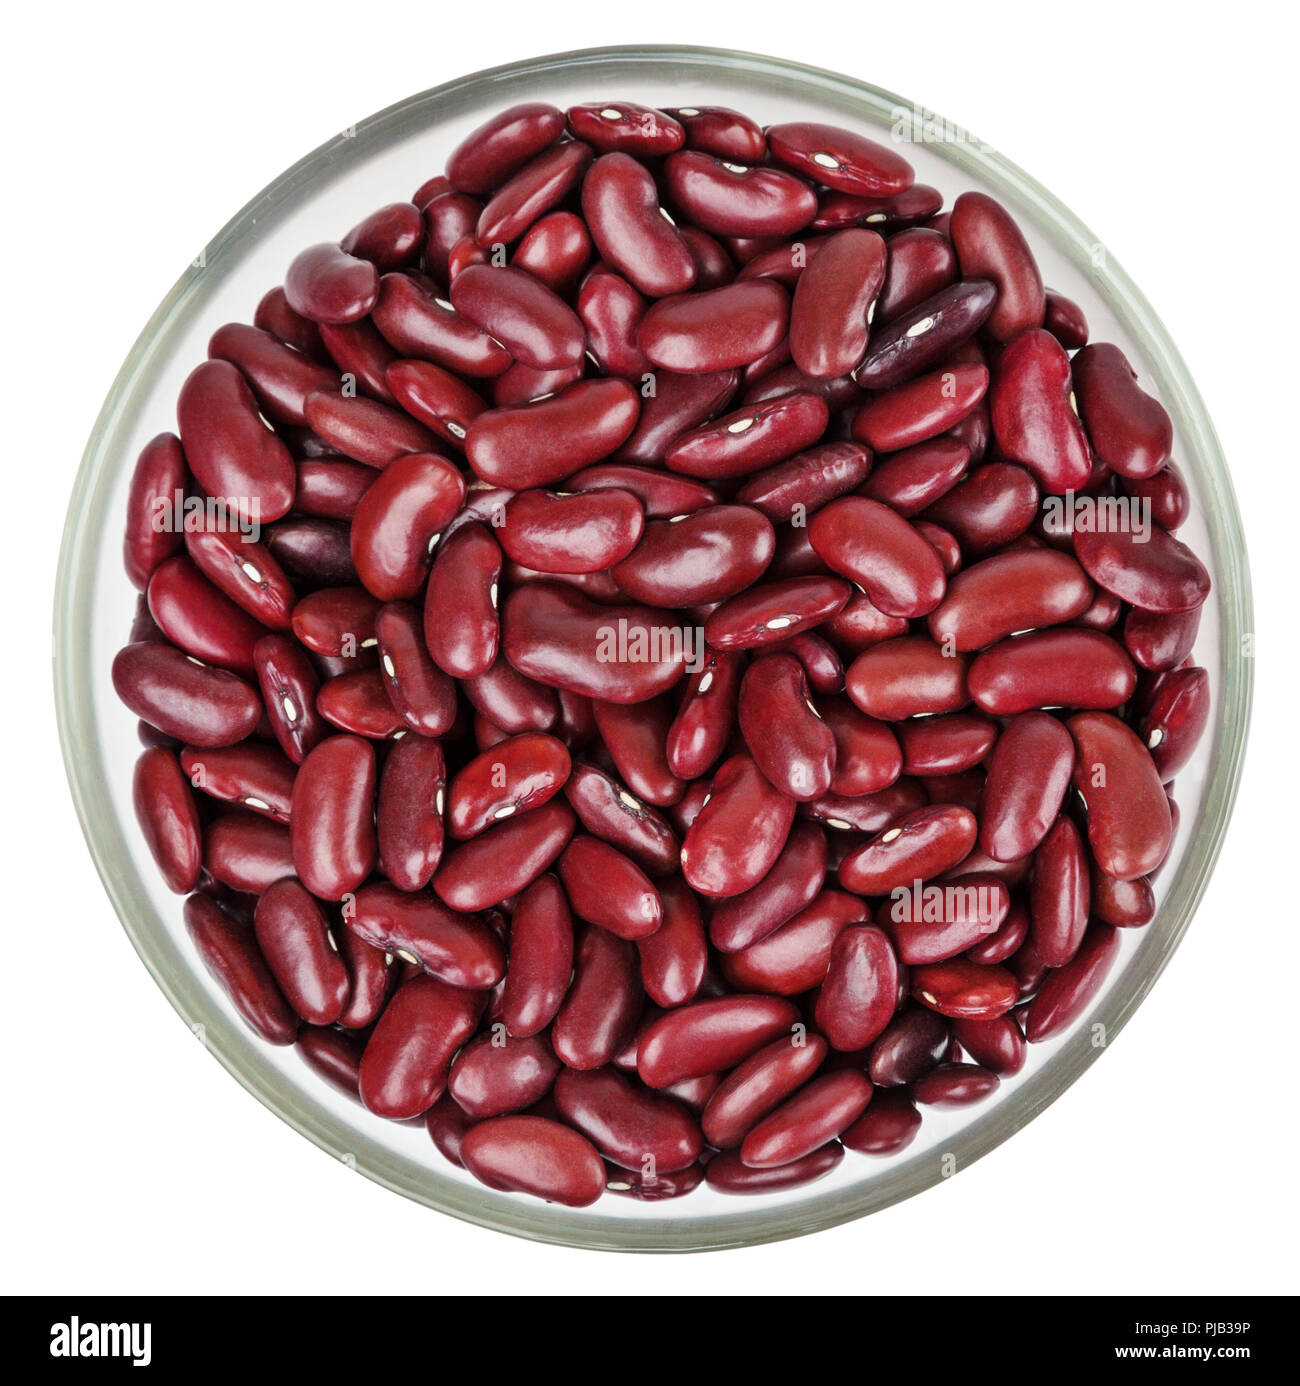 Red kidney beans isolated on white background with clipping path Stock Photo